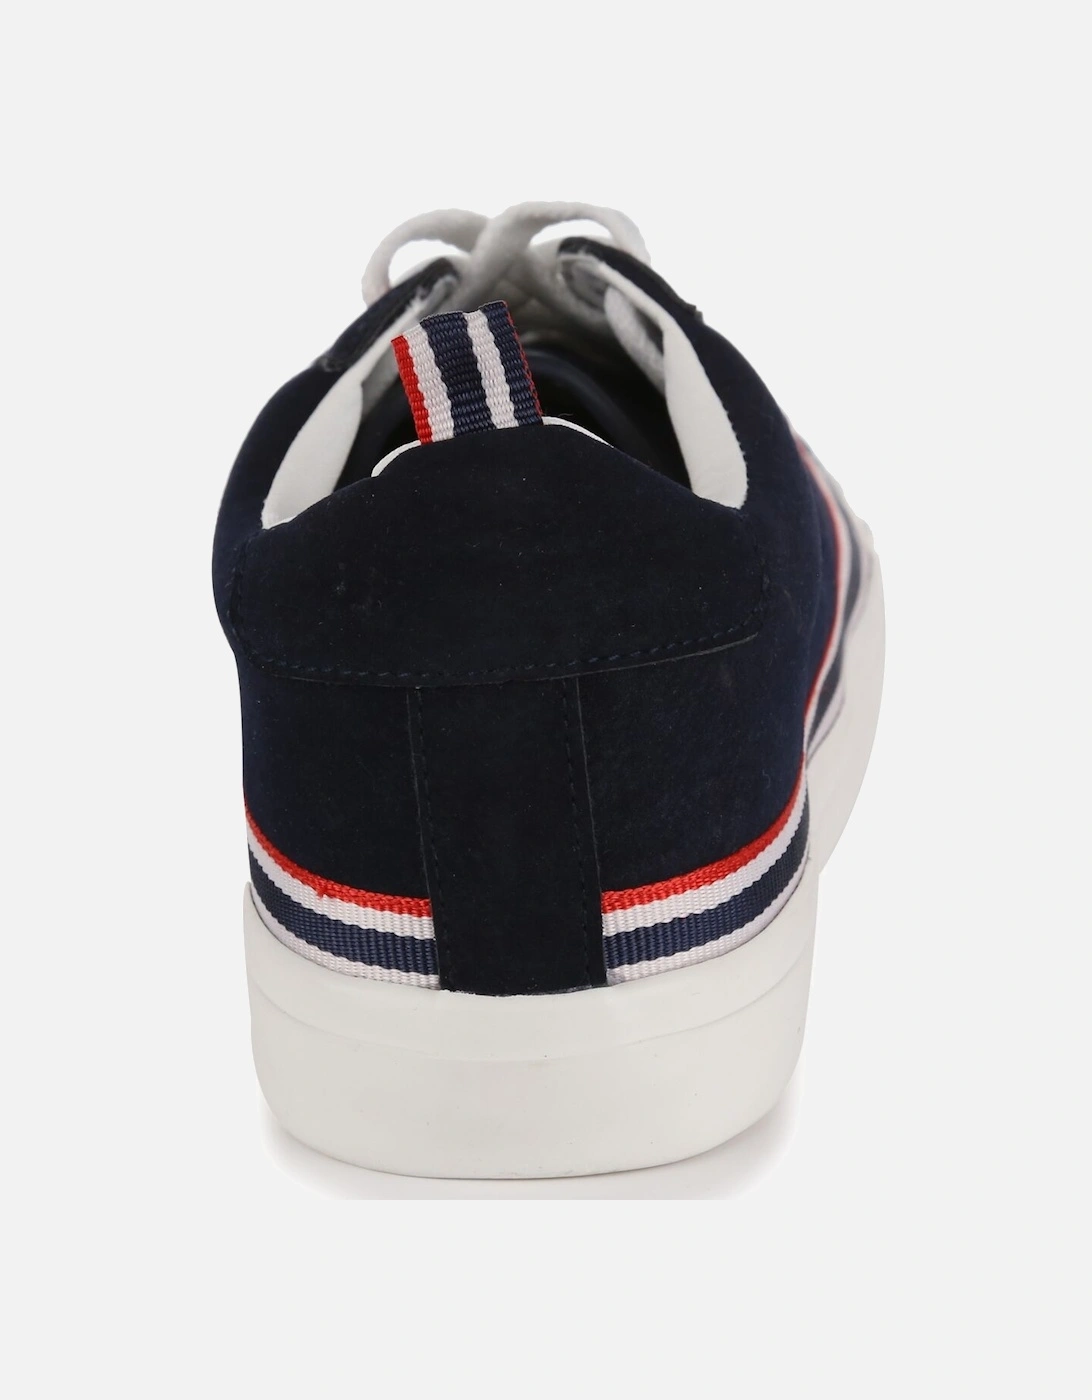 Great Outdoors Mens Stripe Casual Trainers